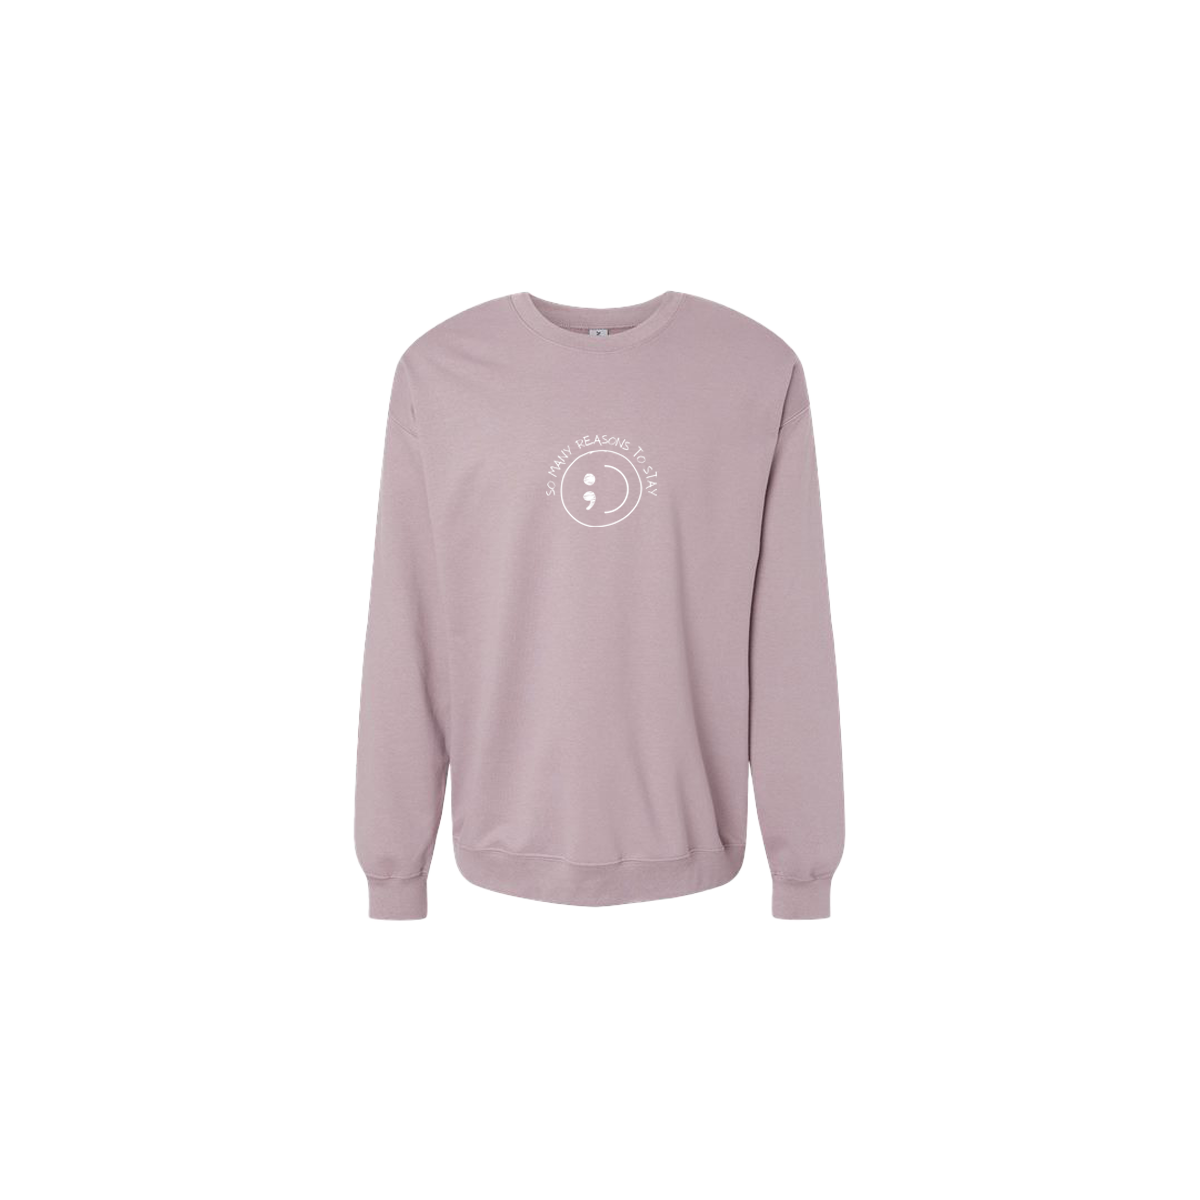 So Many Reasons to Stay Embroidered Mauve Crewneck - Mental Health Awareness Clothing